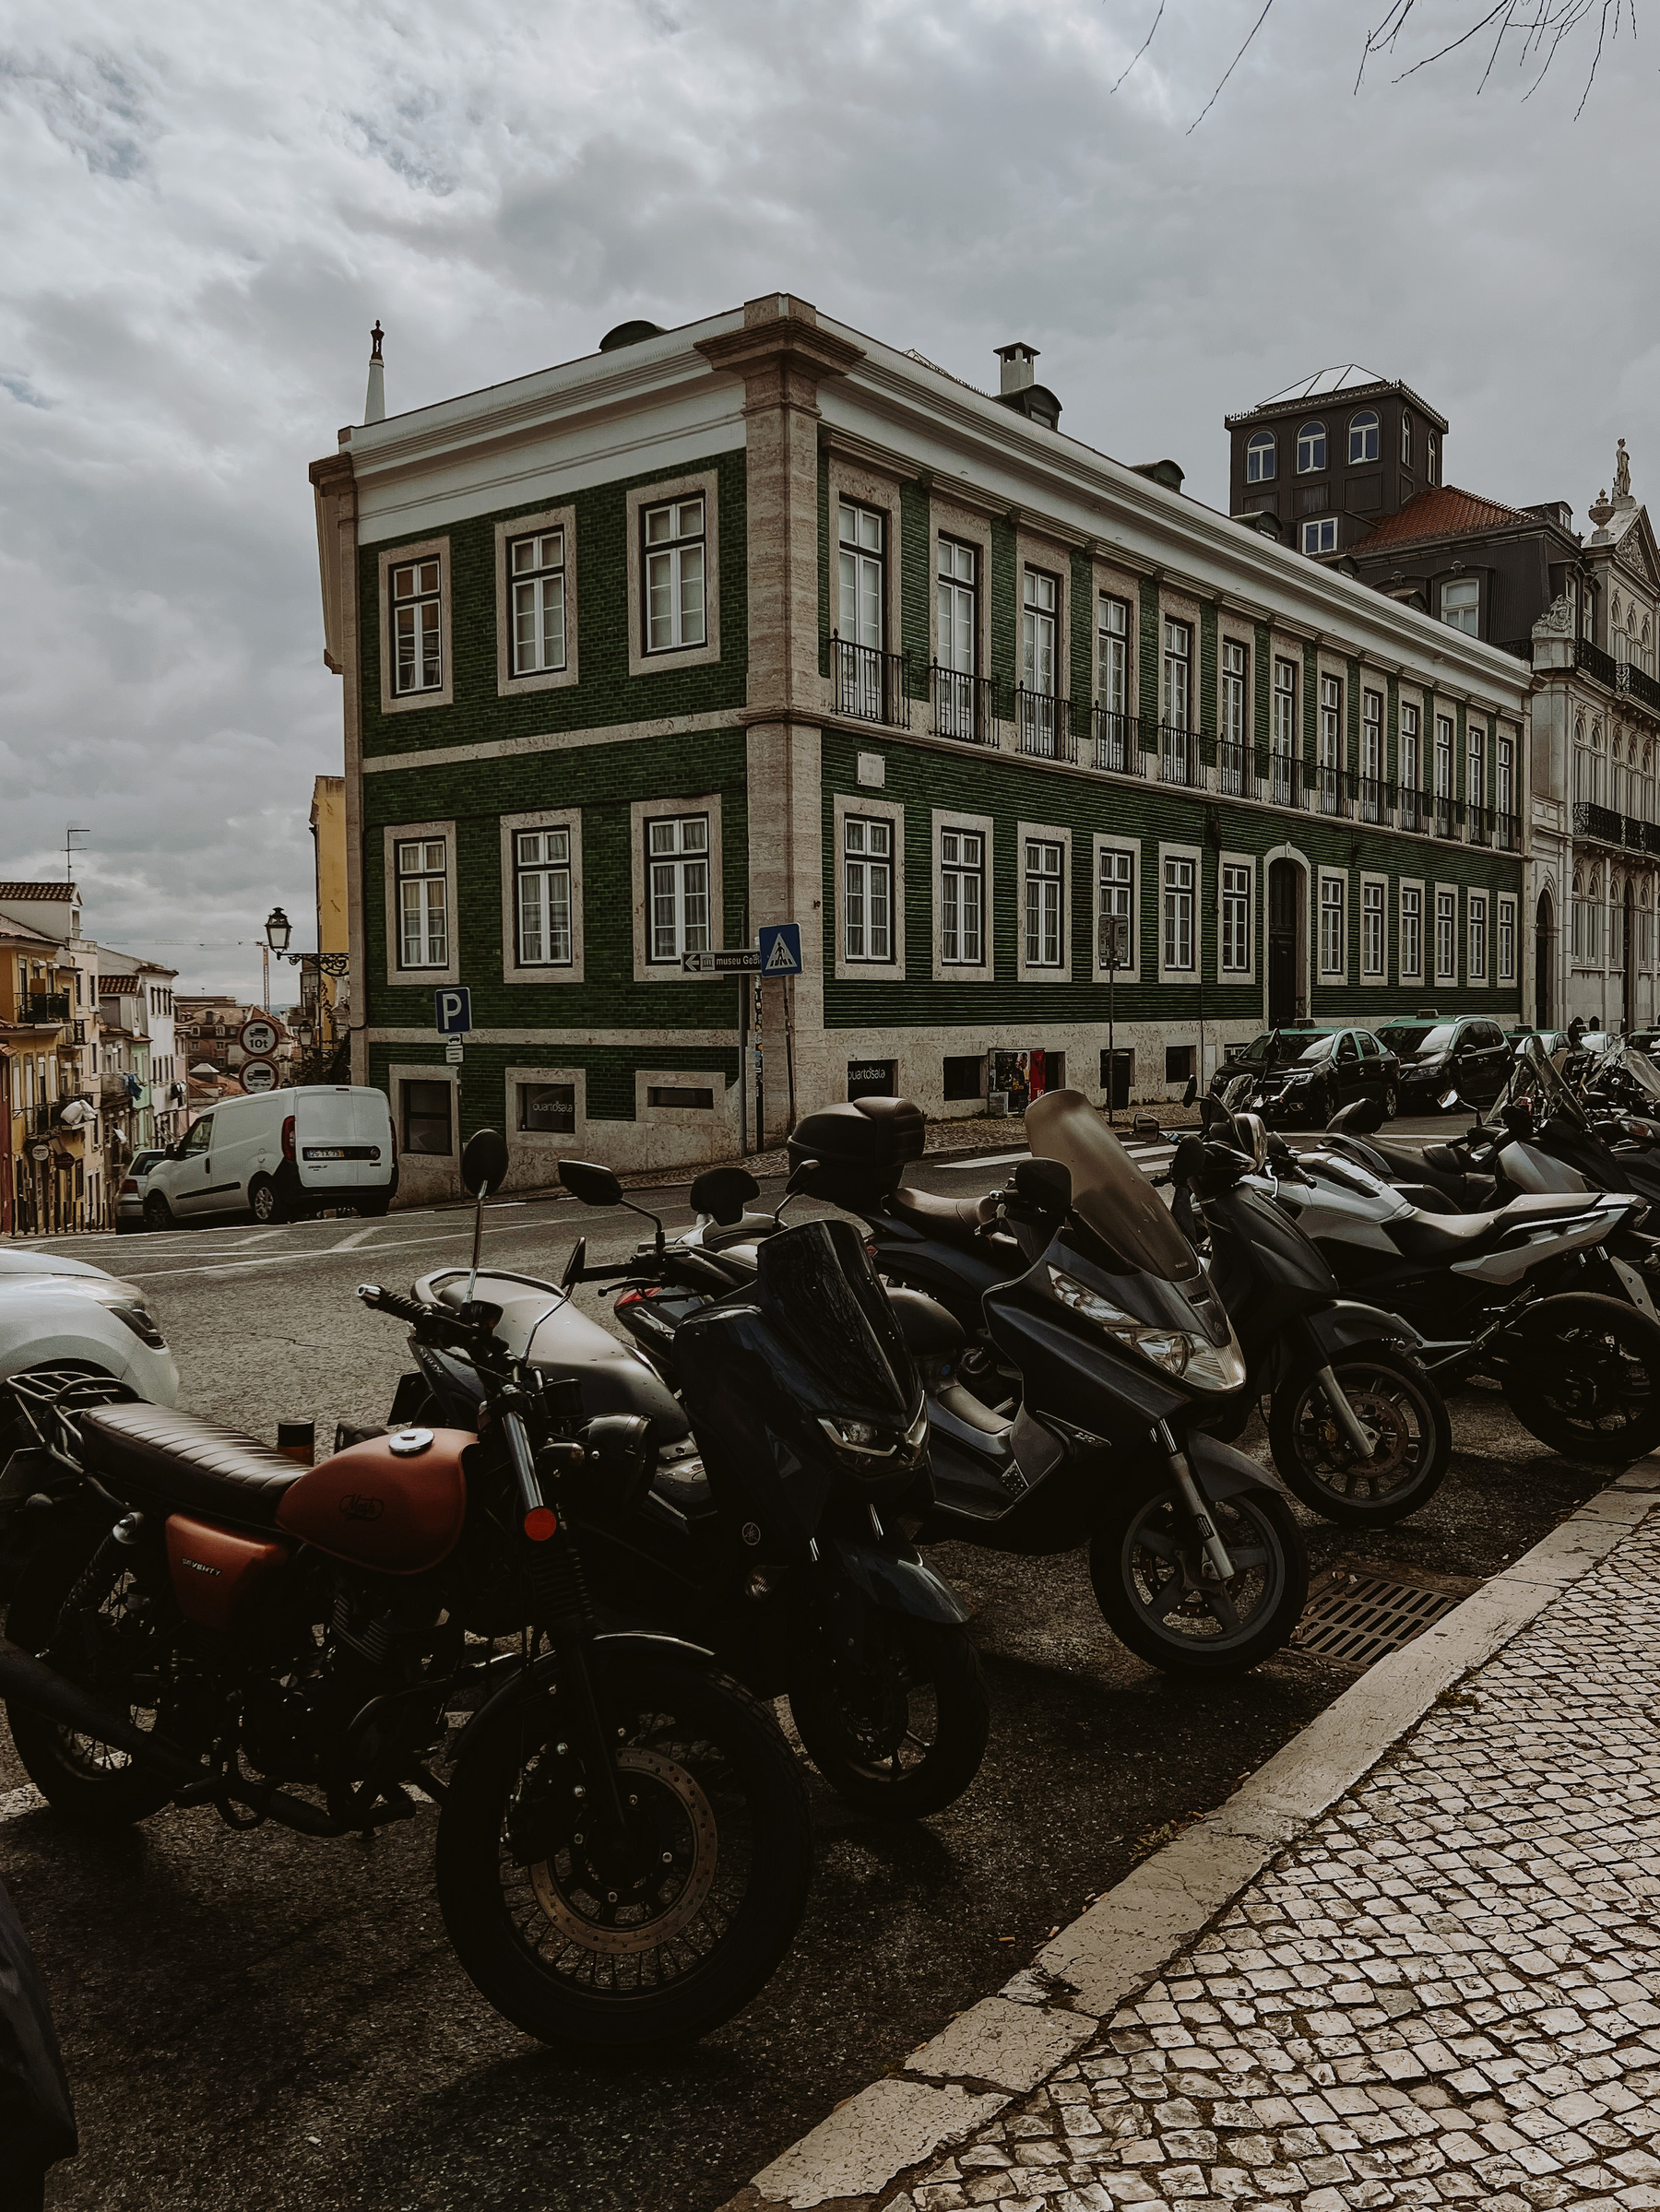 City view, with a building in the back, and a few parked motorcycles in the foreground. Darkish skies. 